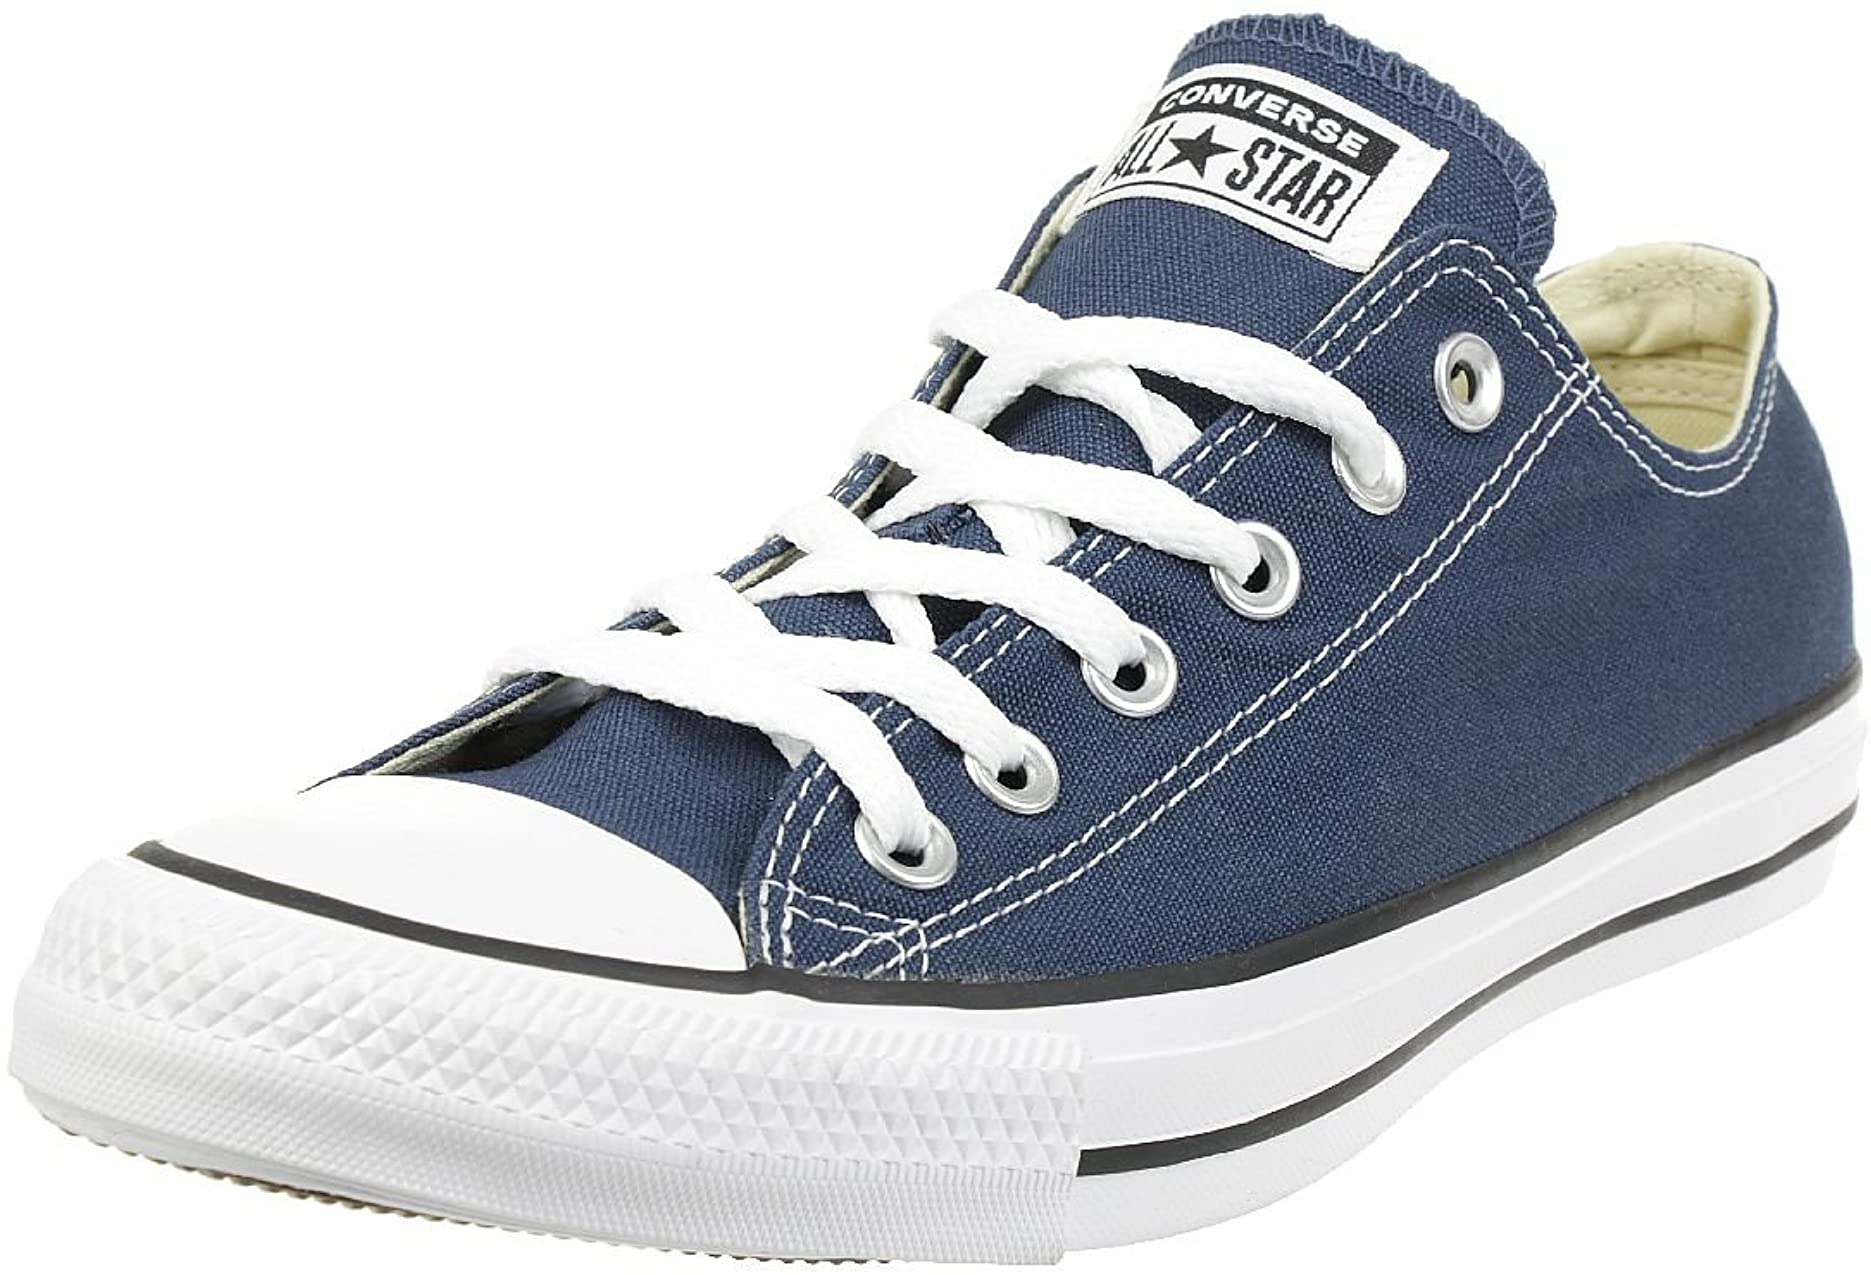 Converse Chuck Taylor All Star Low Top Ox Unisex Sneakers - Navy - 12M/14W